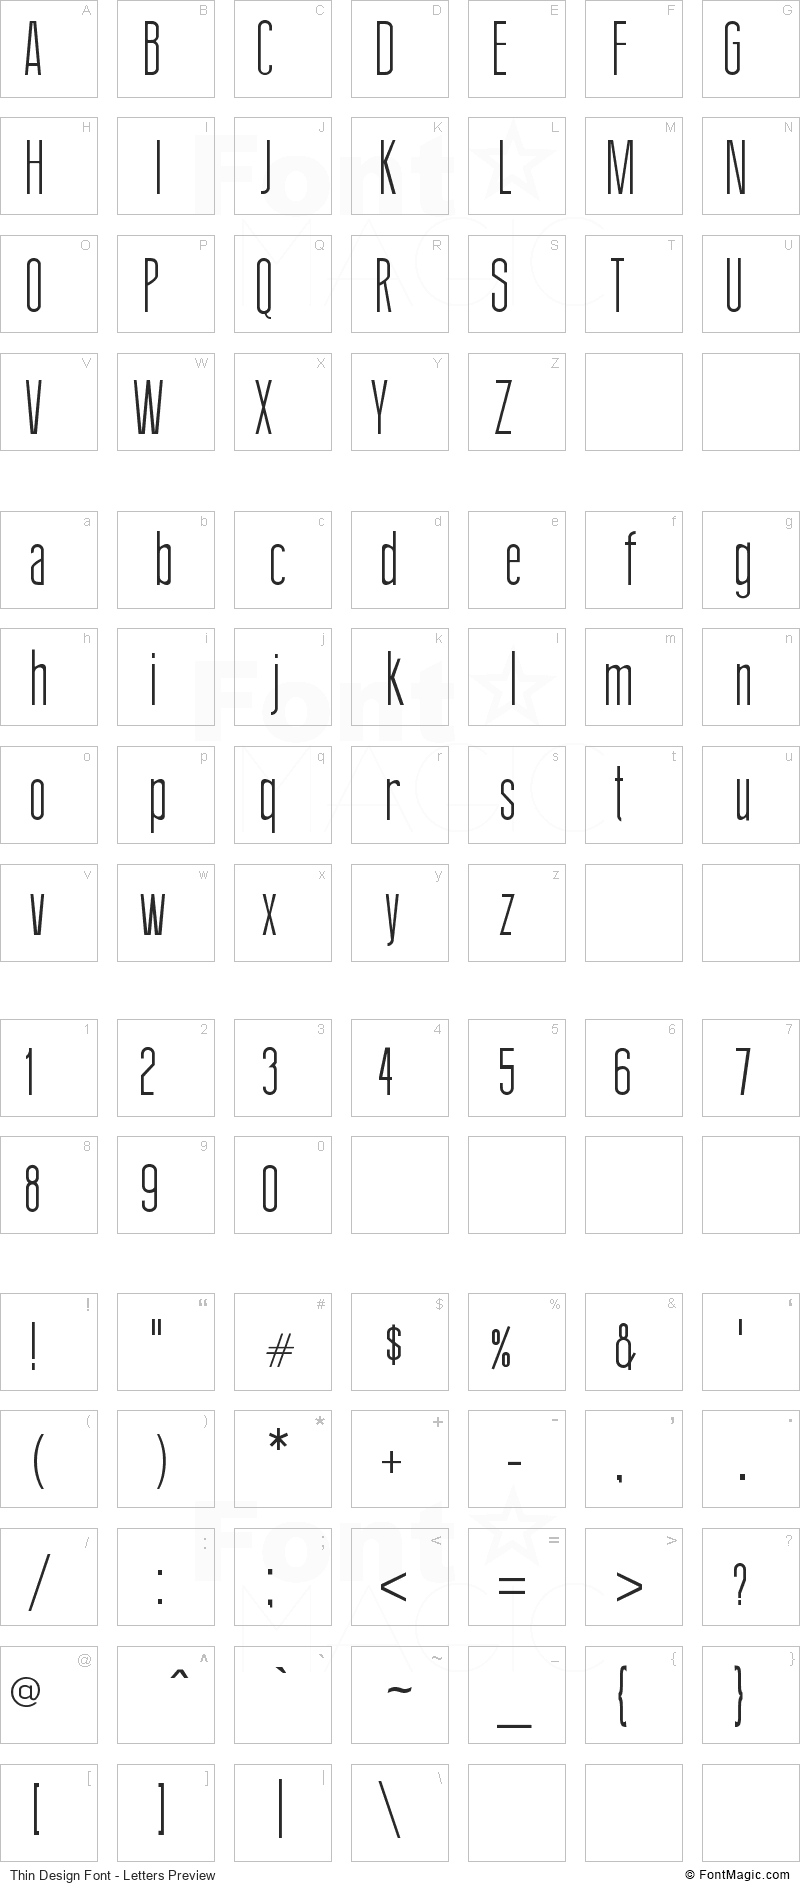 Thin Design Font - All Latters Preview Chart